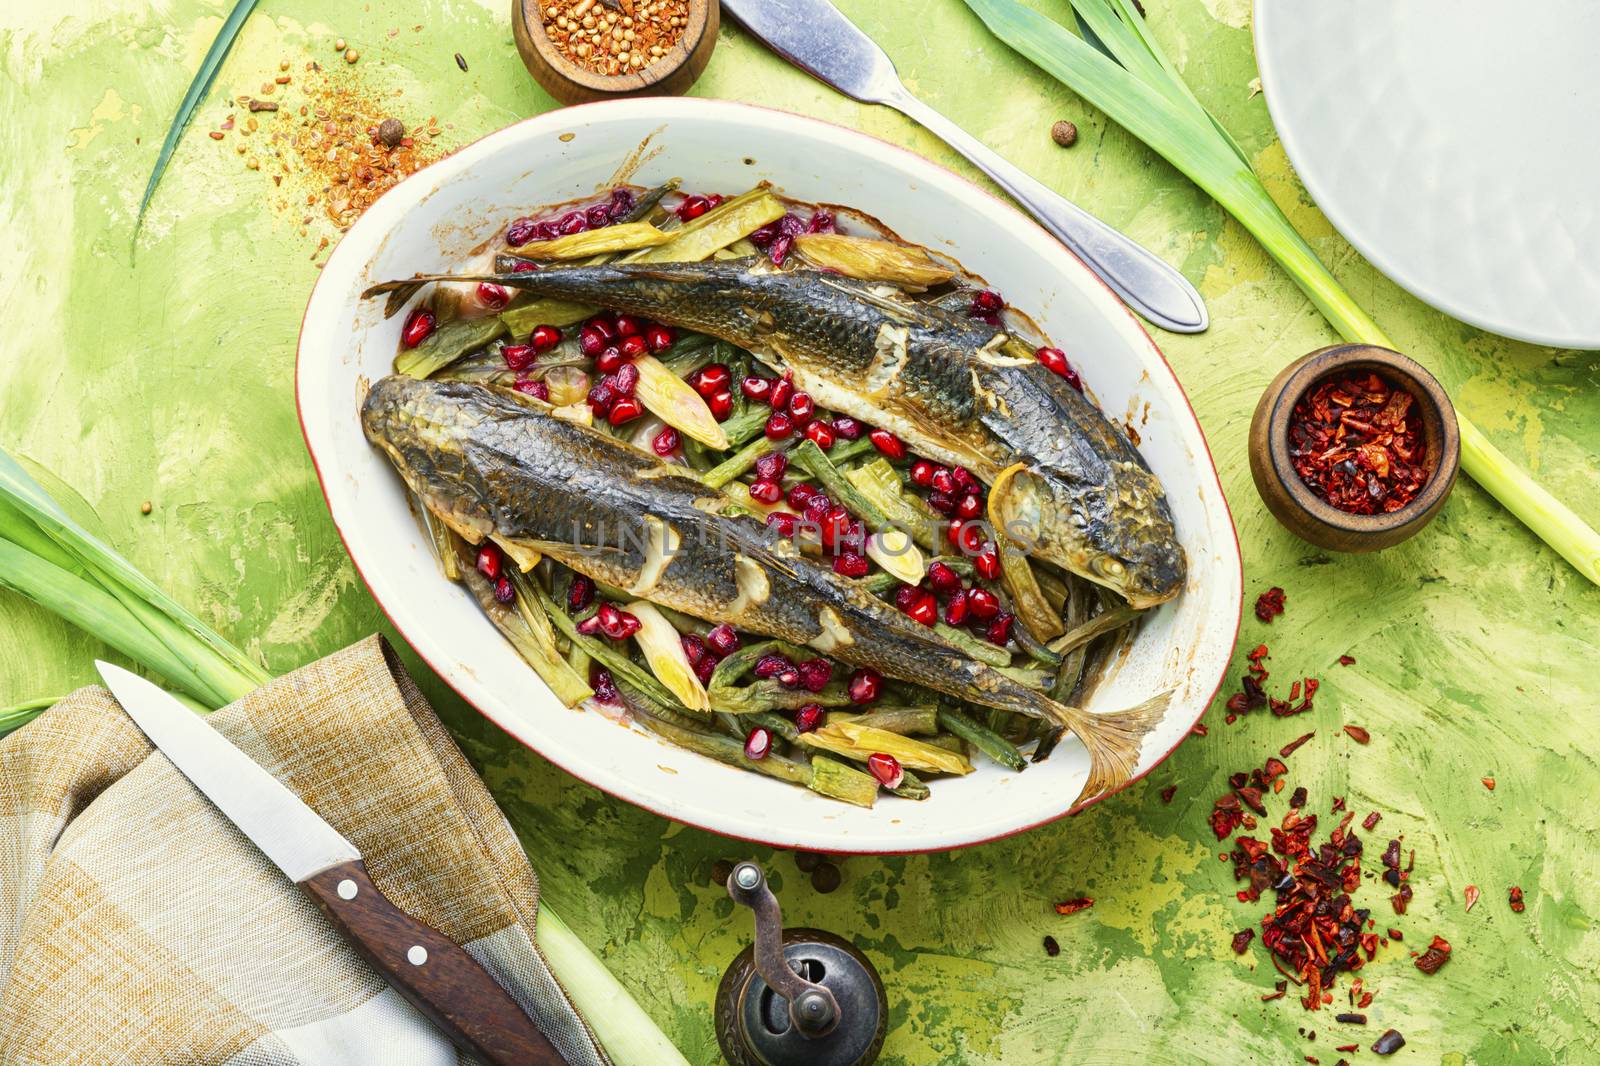 Pelengas baked with vegetables and pomegranate.Tasty baked whole fish